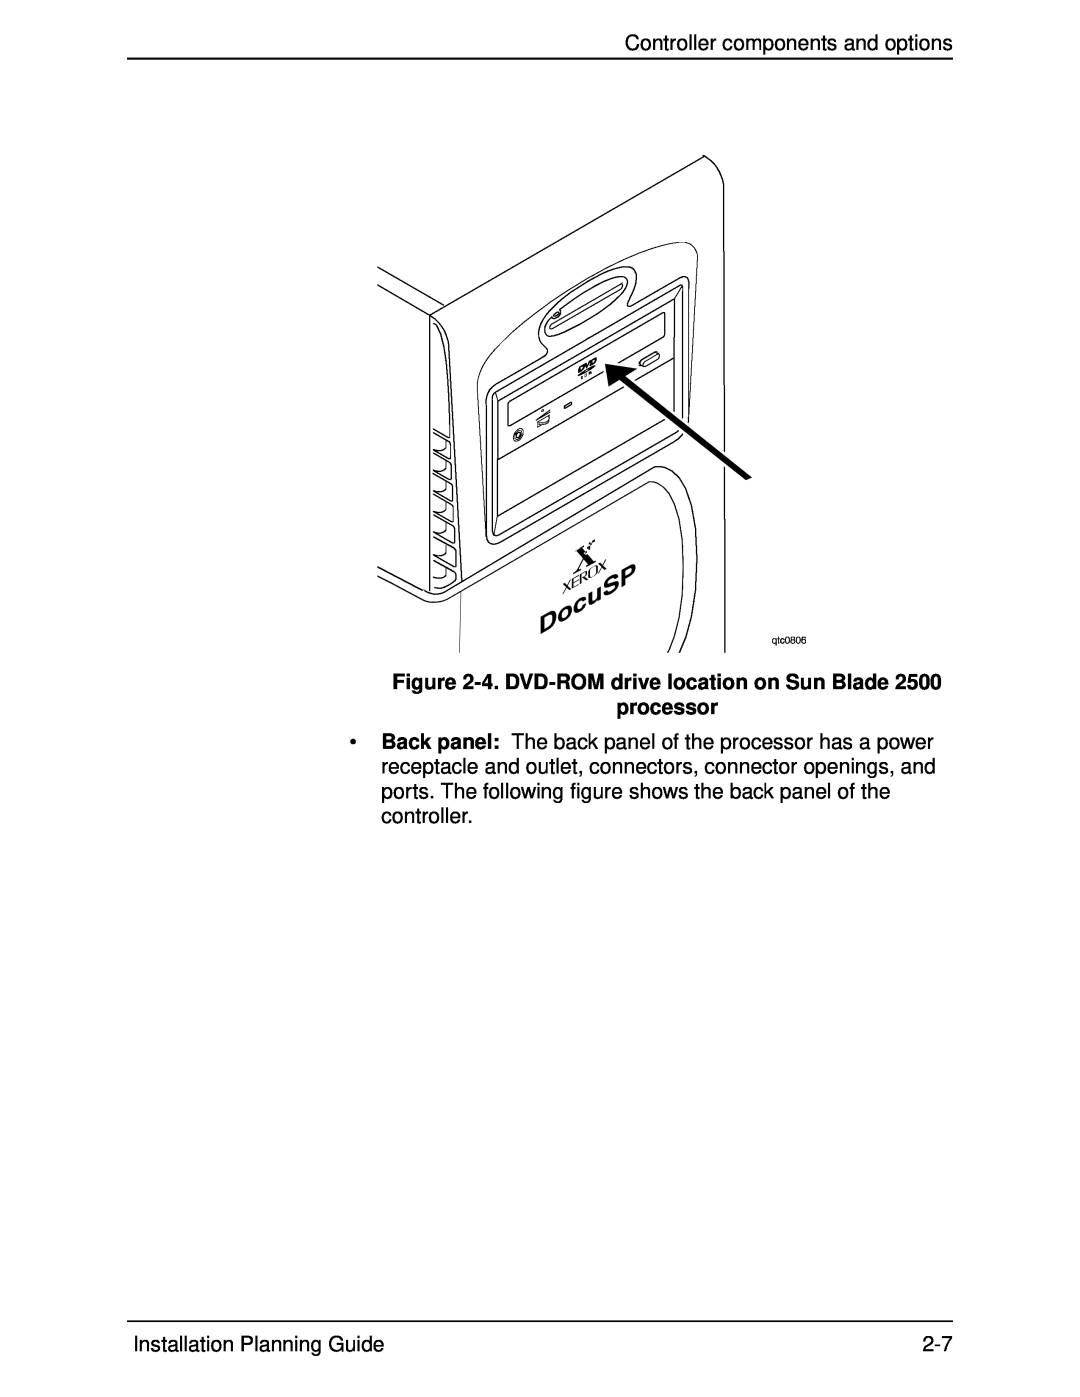 Xerox 115 Controller components and options, 4. DVD-ROM drive location on Sun Blade processor, Installation Planning Guide 